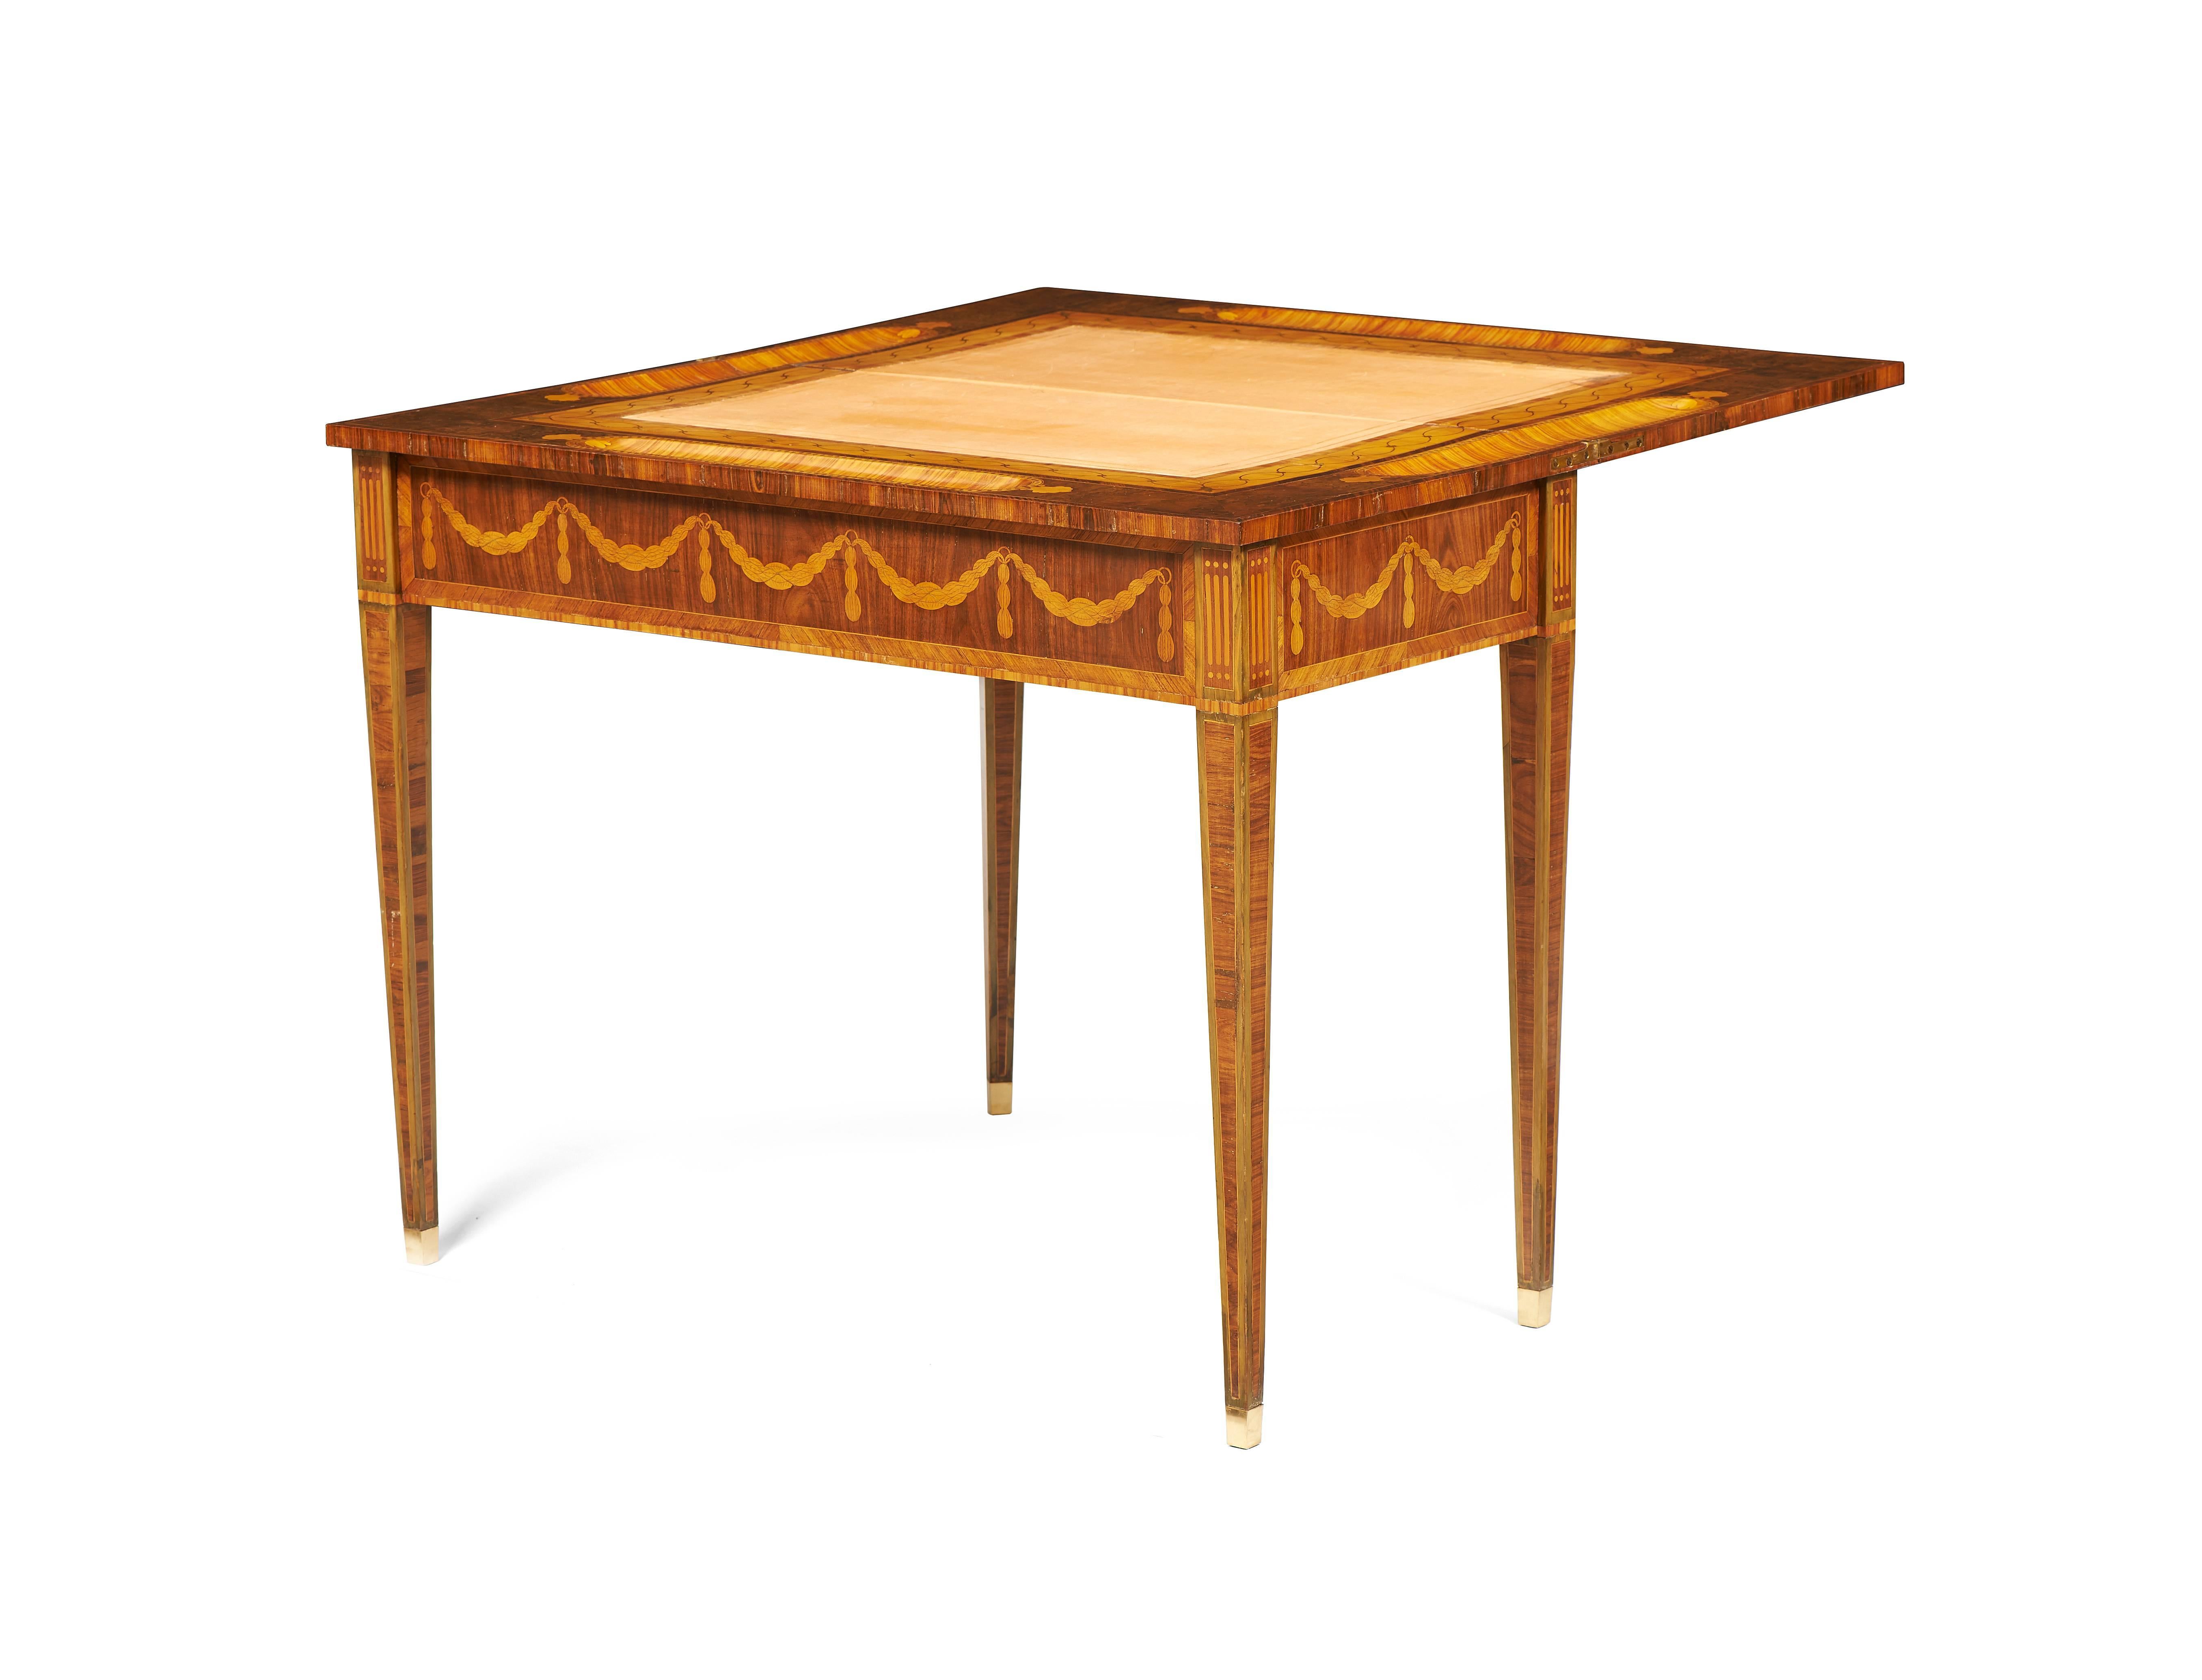 For sale on 1stdibs an 18th Century Neoclassical Russian Games Table  on rosewood with the finest marquetry quality: burr walnut, box wood and satin wood inlaid's circa 1785. On the four sides there is a notch designed for gambling chips finished